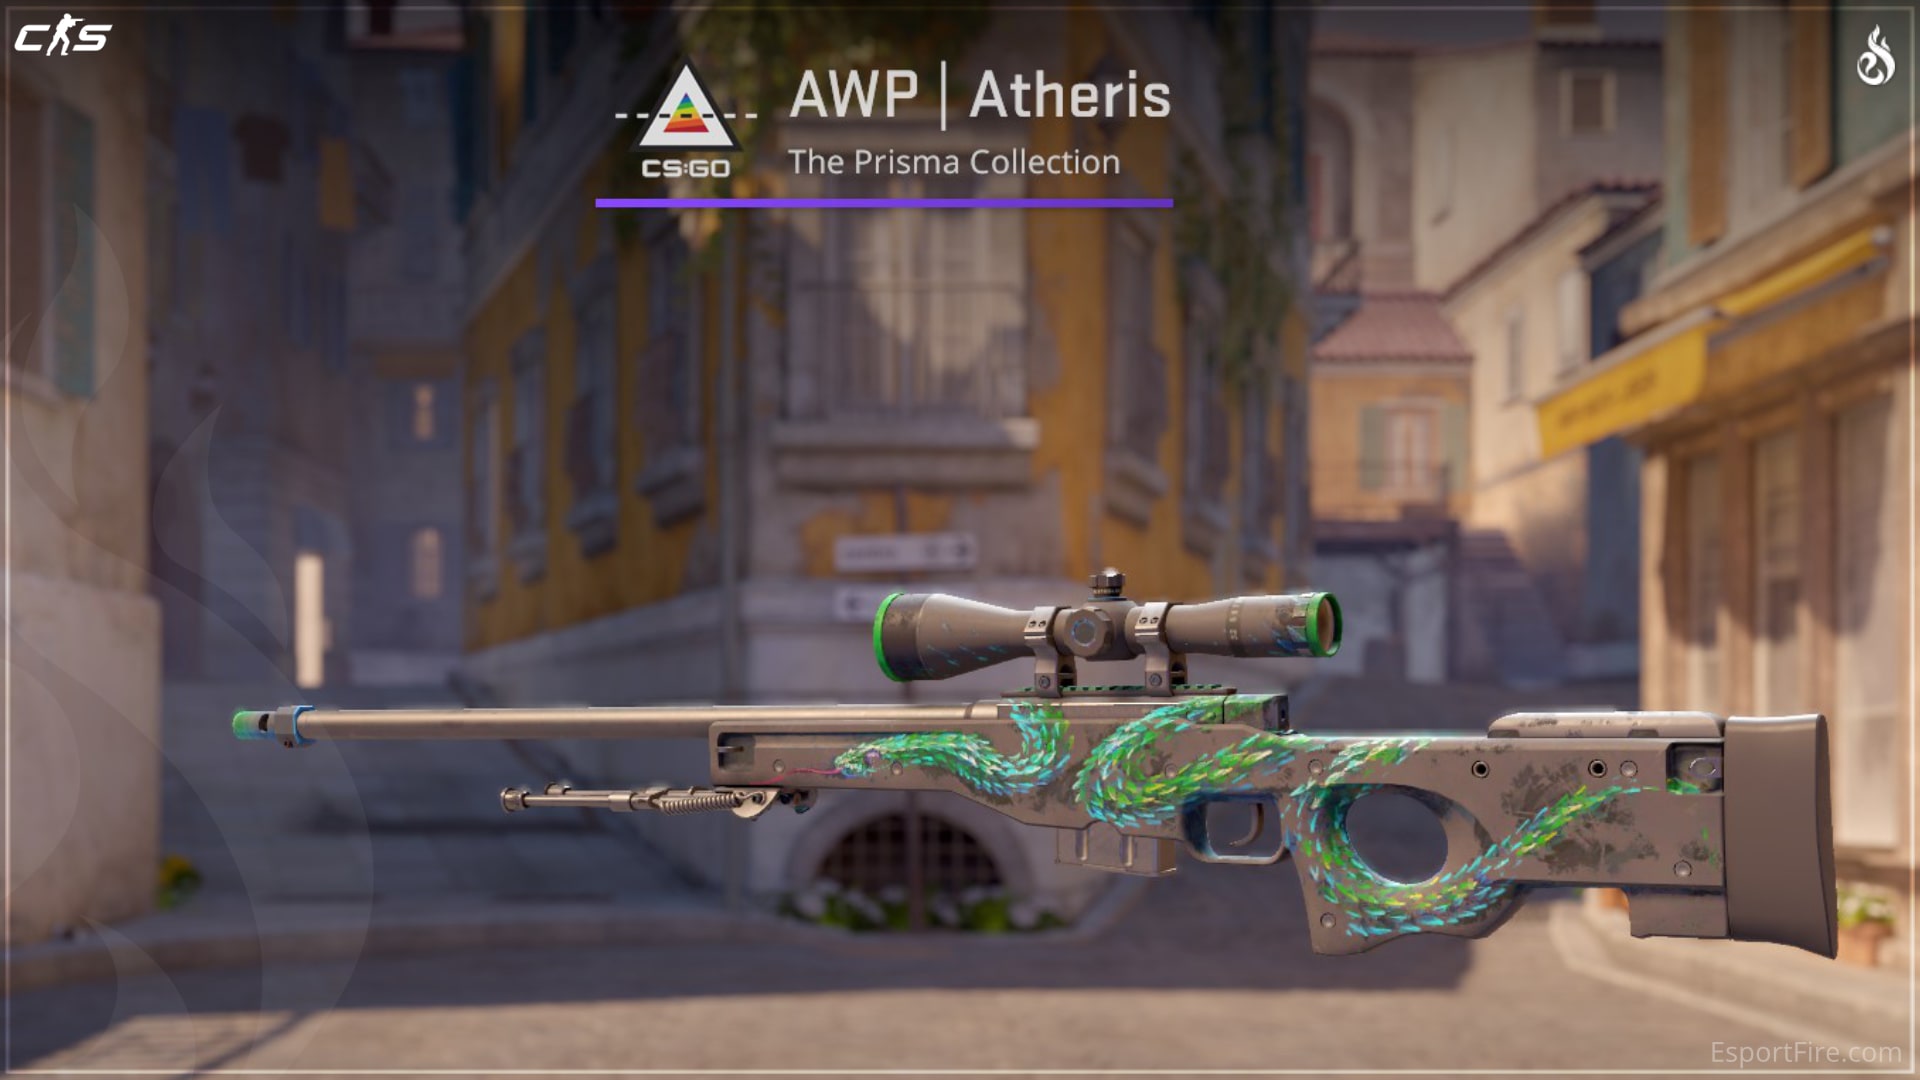 Best Battle Scarred Skins - Atheris